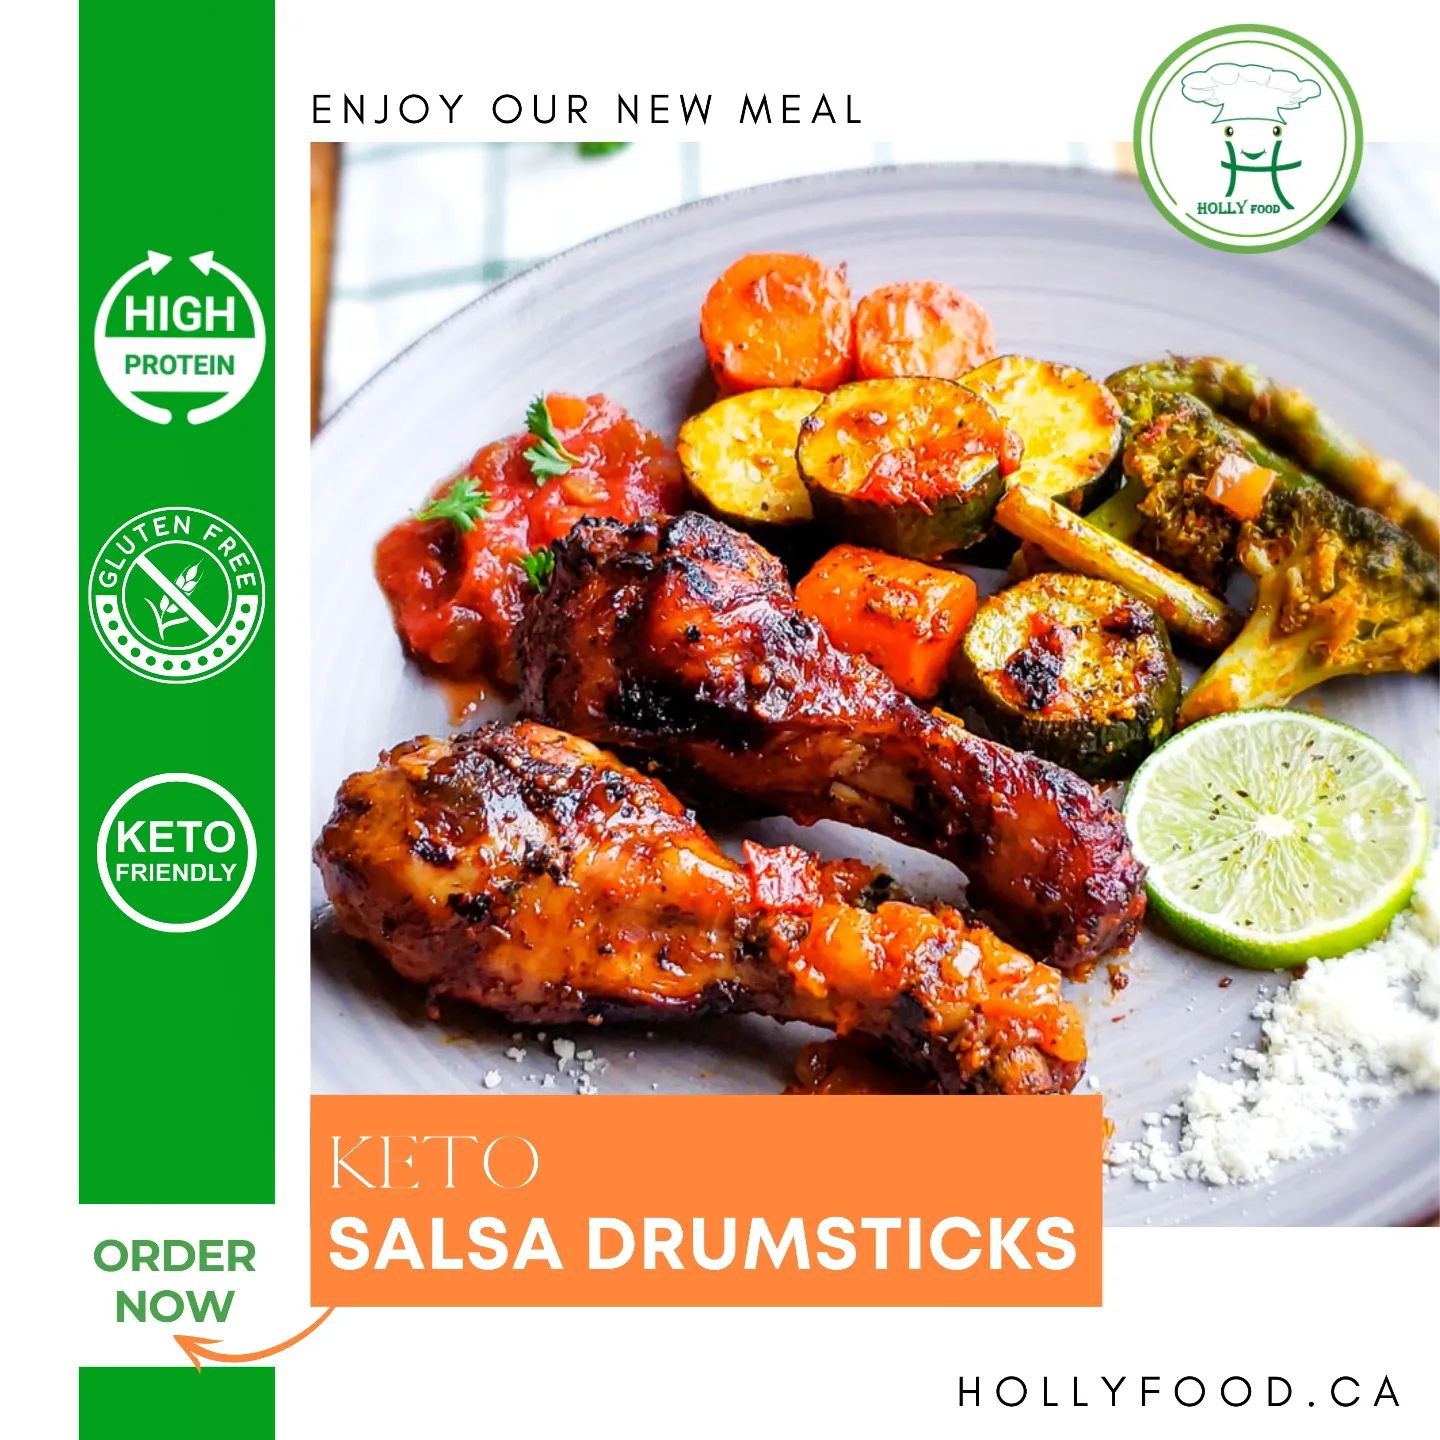 Who wants this meal? 😍
Keto Salsa Drumsticks on our menu this week. 🍗
Order now!

Order Meal Prep Delivery This Week And Have All Your Meals Ready To Reheat!

…………………………………………
Go online and order now at
WWW.HOLLYFOOD.CA
Or 📞 604-364-1416
…………………………………………
We cook Food & Serve Love♥️
Follow #HollyFoodCanada for more!